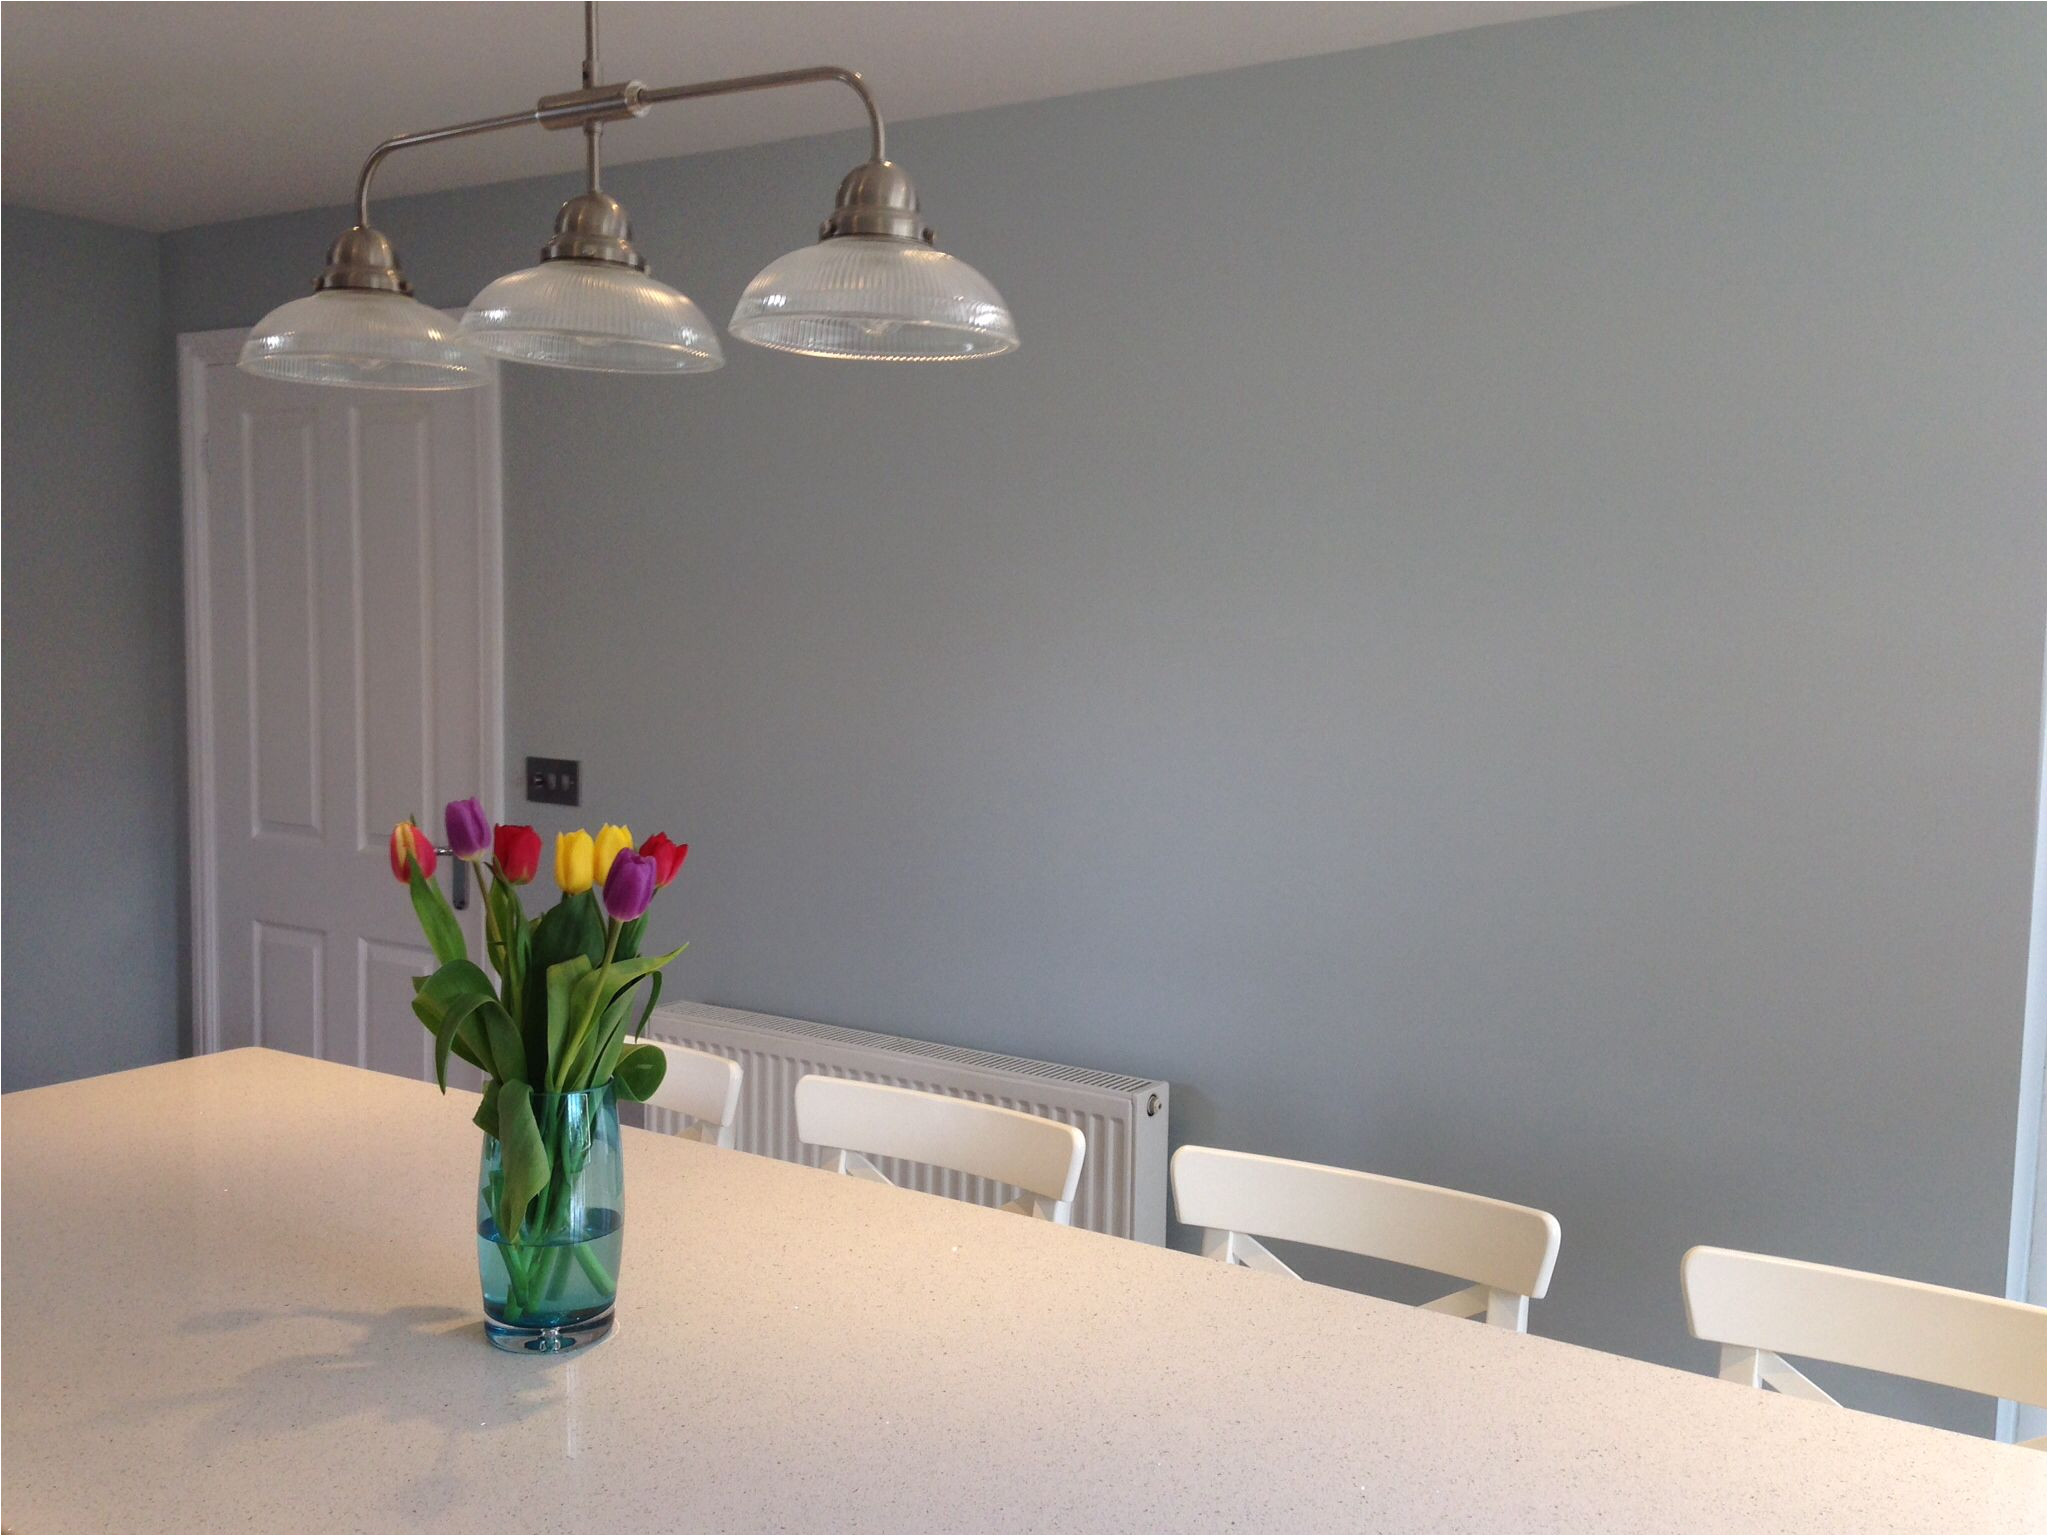 skylight by farrow and ball for wall colour a beautiful warm muted blue grey looks lovely against the white chairs and worktops farrow and ball